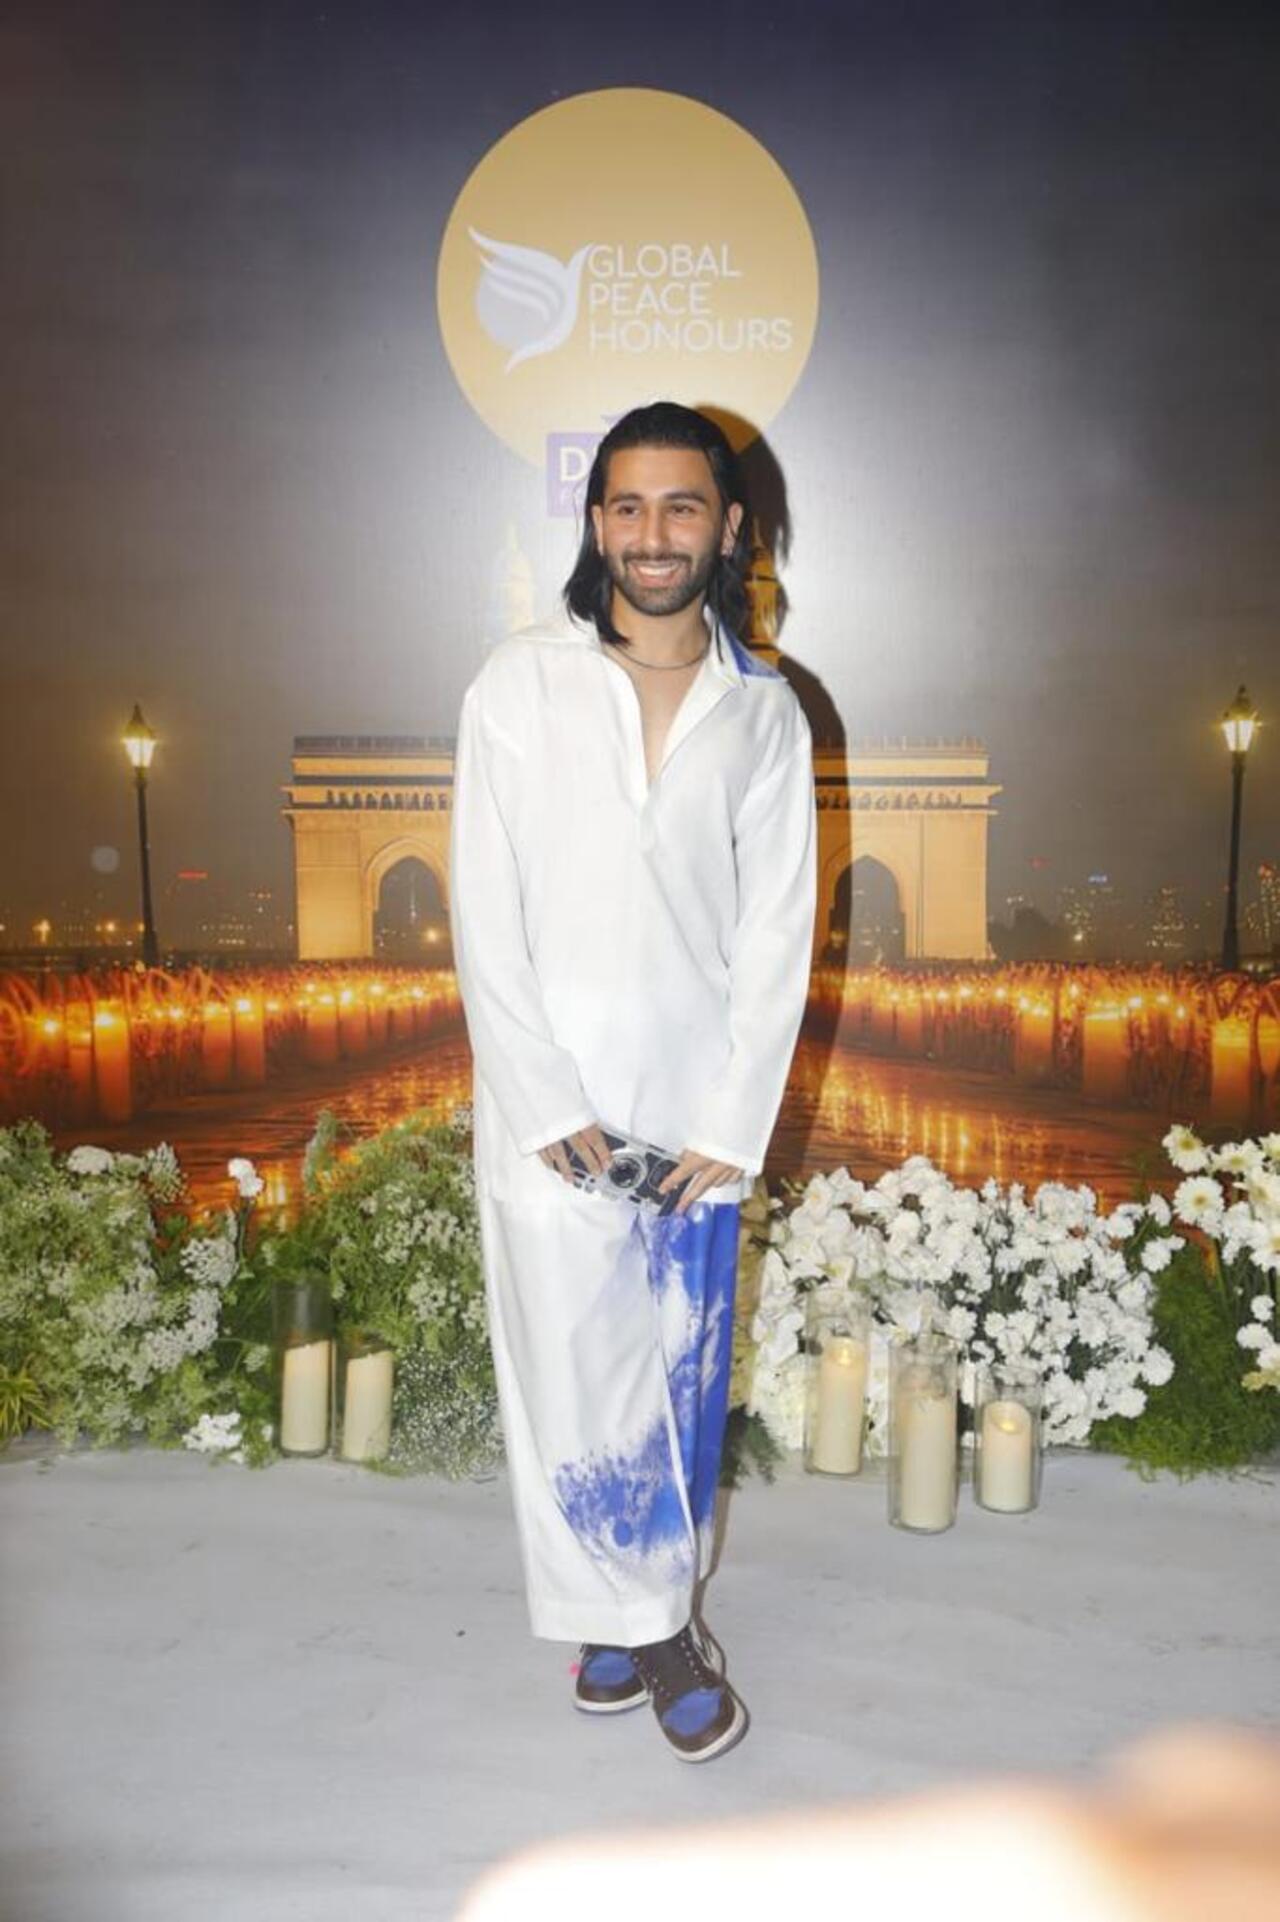 Orry was also seen at the event dressed in an all-white attire